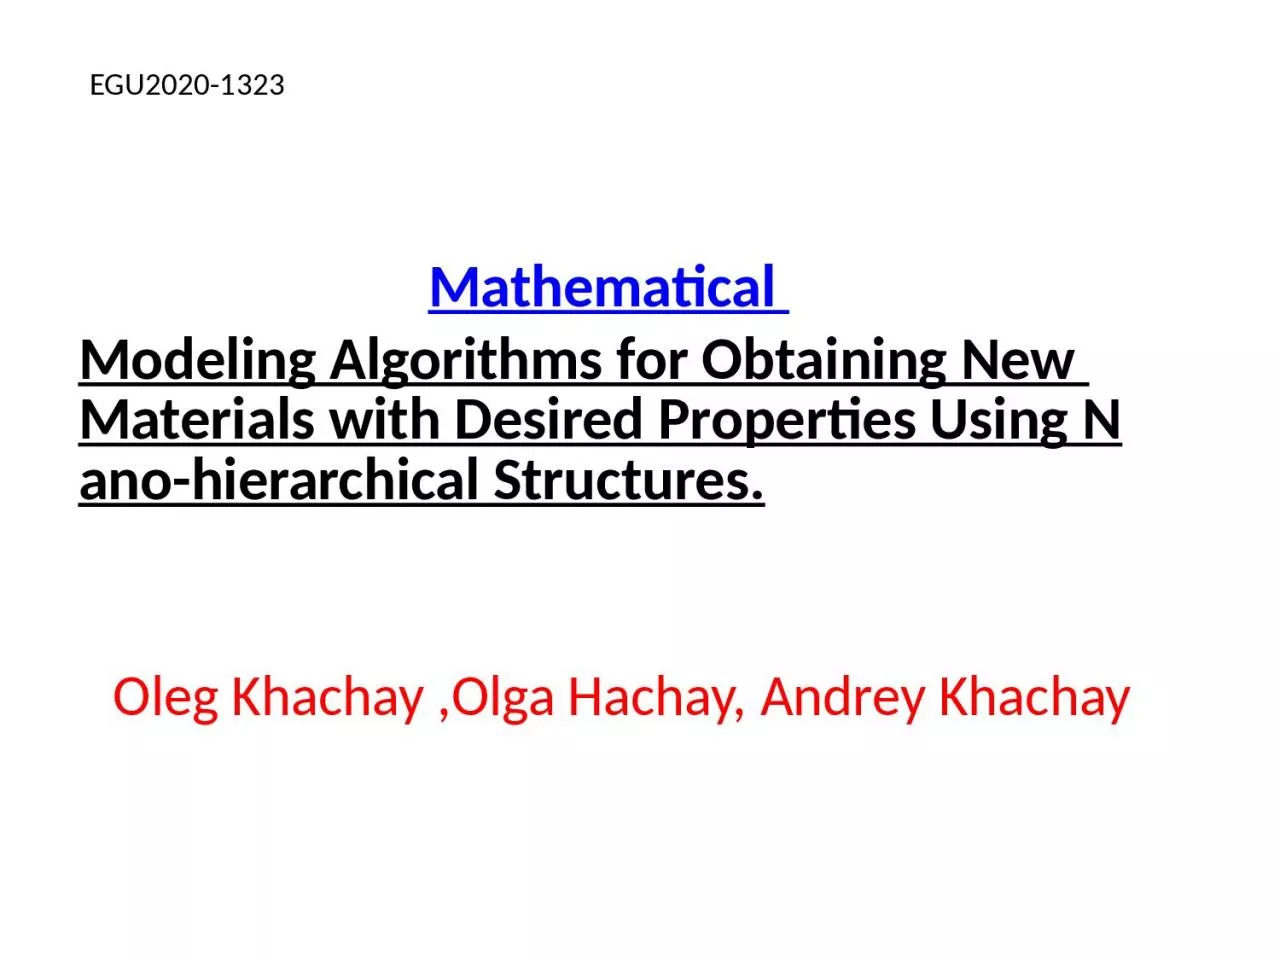 Mathematical  Modeling Algorithms for Obtaining New Materials with Desired Properties